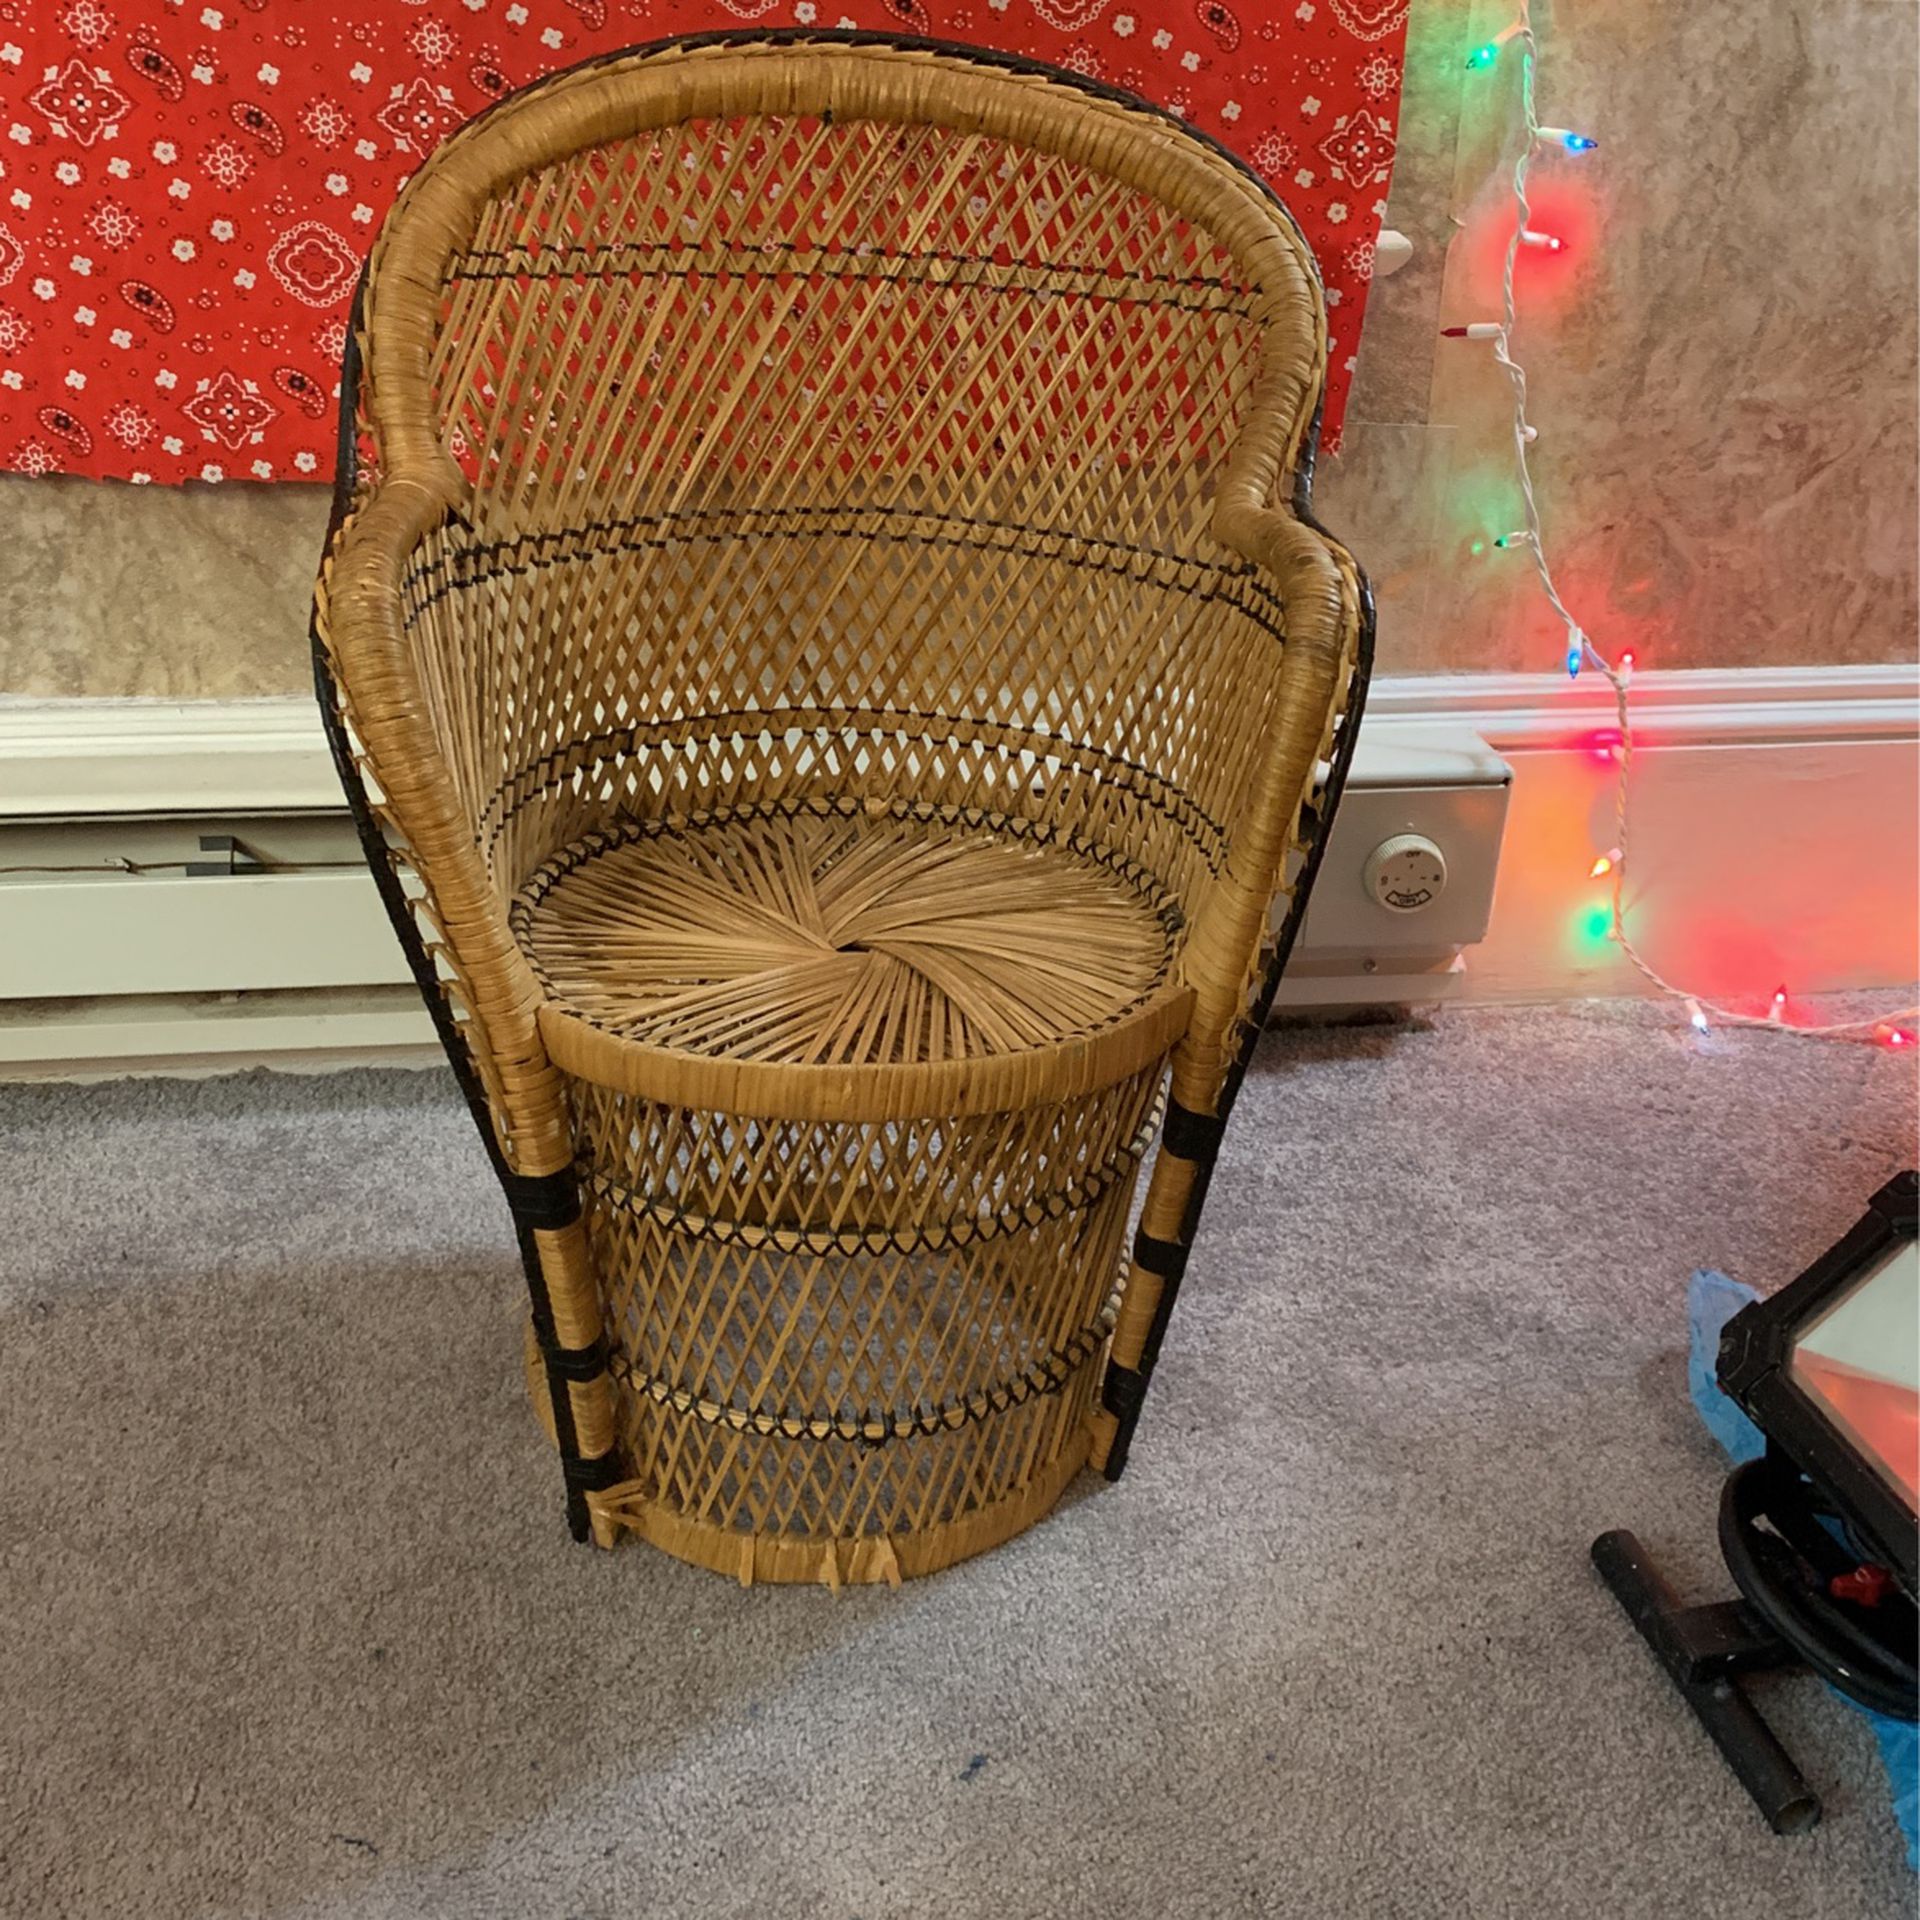 Vintage Large Child's Wicker Peacock Type Rattan Chair - Rare 24"